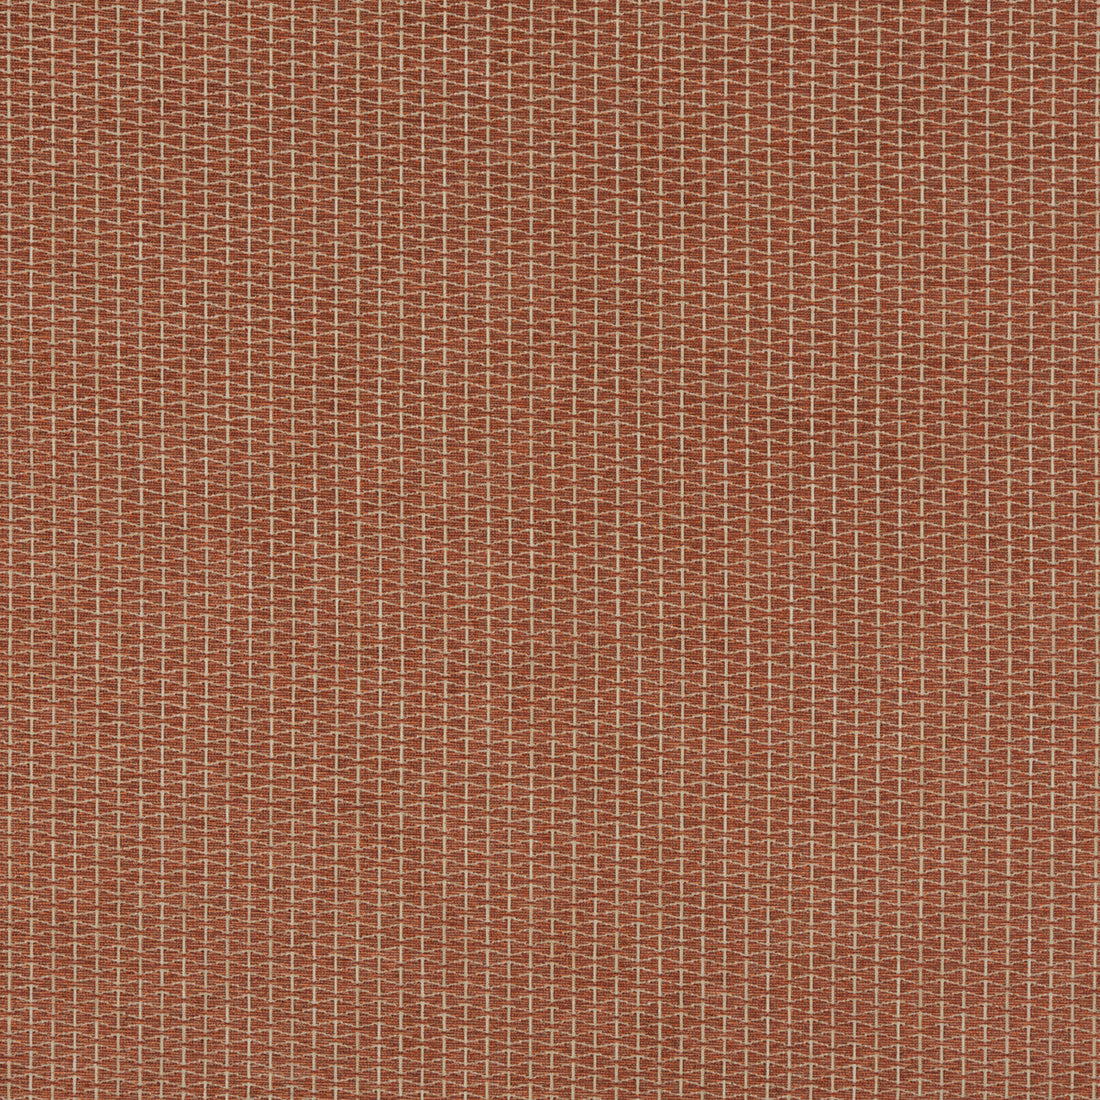 Vortex fabric in spice color - pattern BF10681.330.0 - by G P &amp; J Baker in the Essential Colours collection